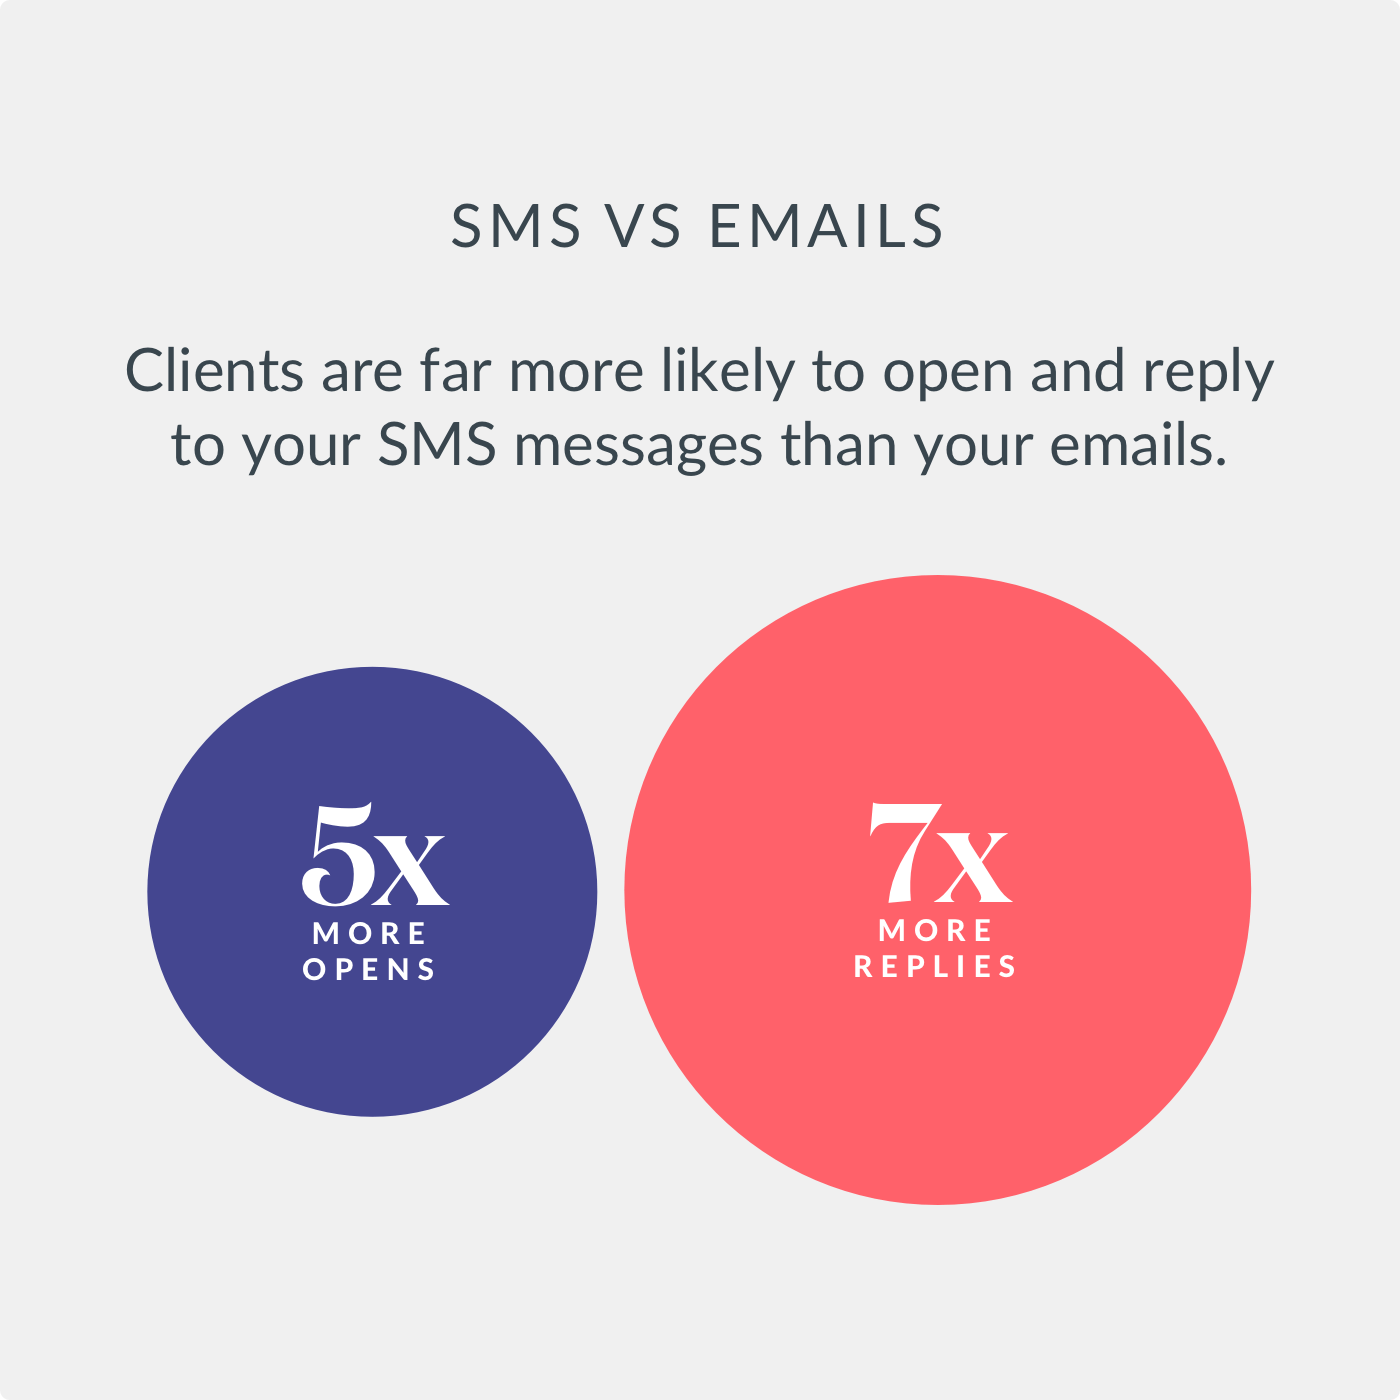 SMS is far more likely to reach your clients than emails.